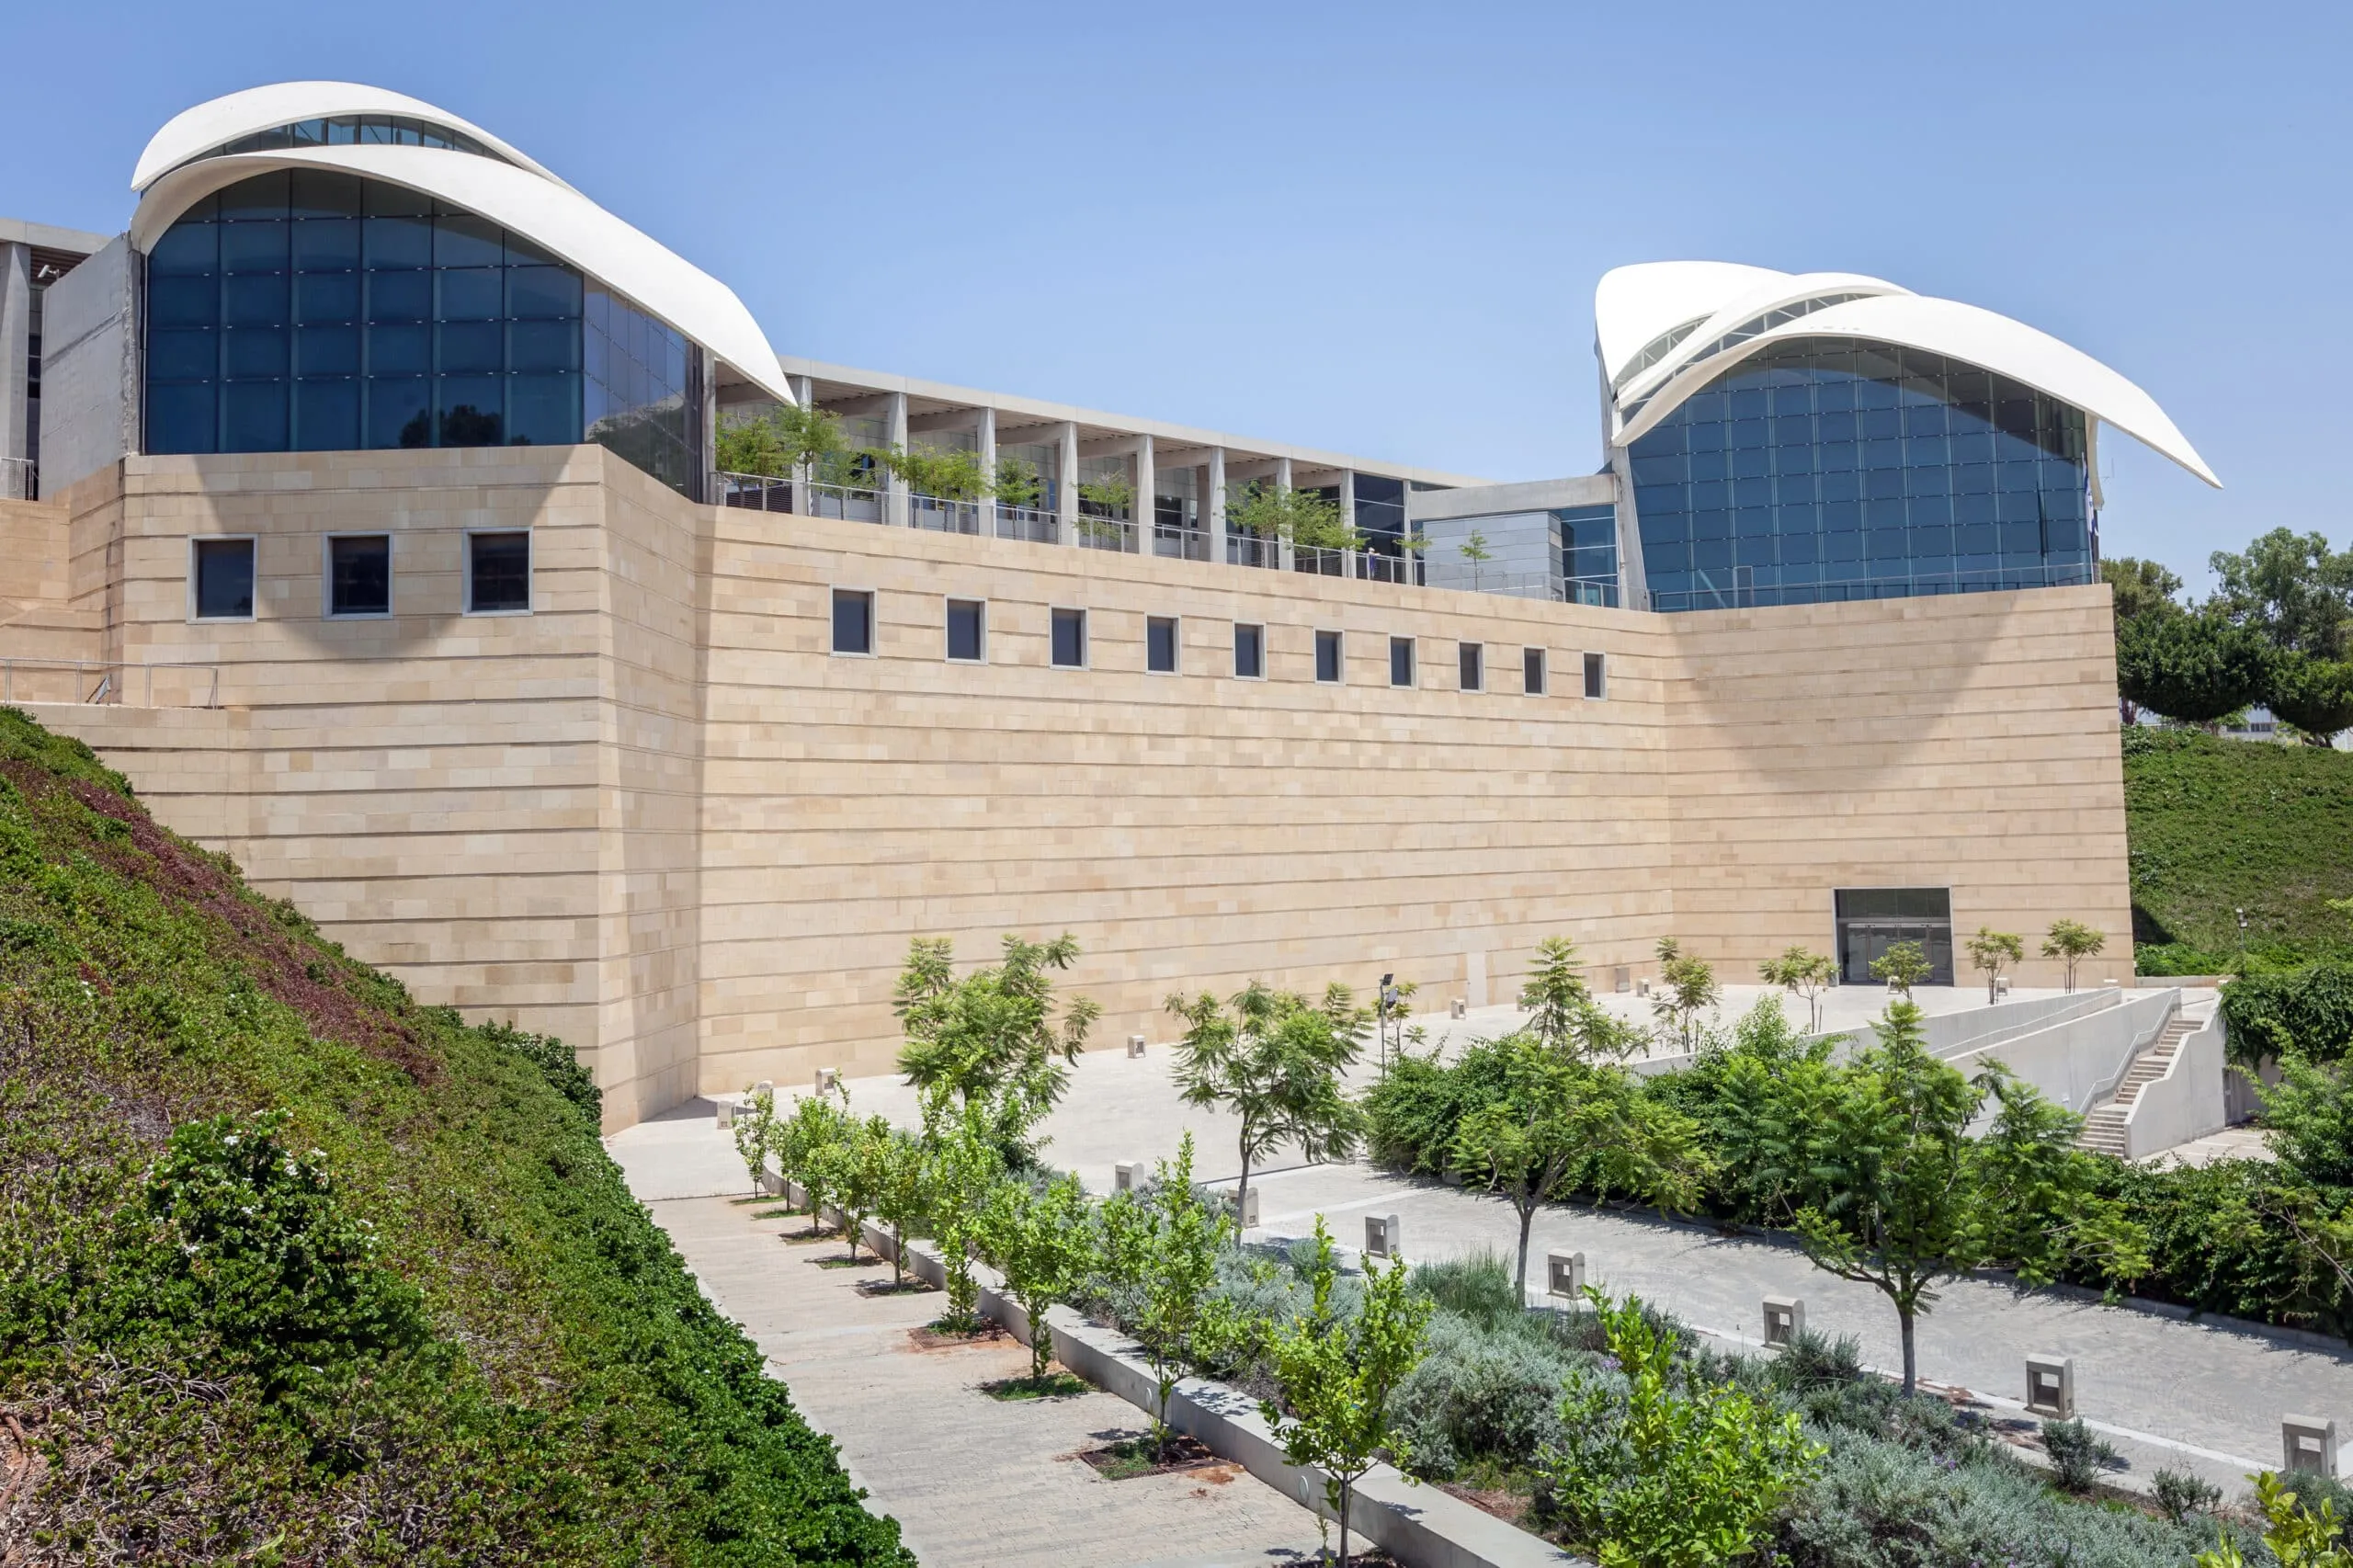 Yitzhak Rabin Center in Israel, Middle East | Architecture - Rated 3.6